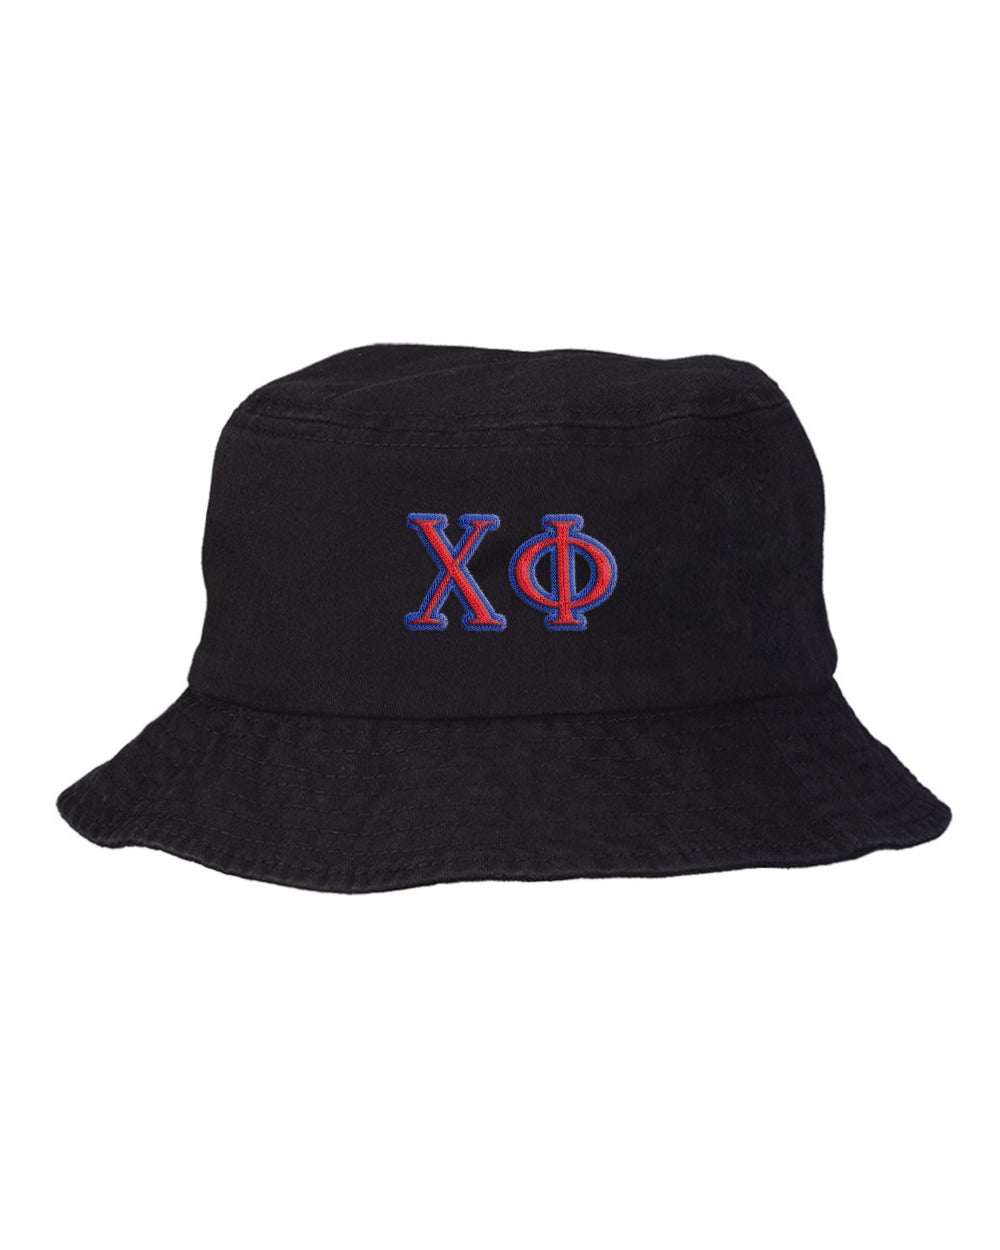 Chi Phi Embroidered Bucket Hat